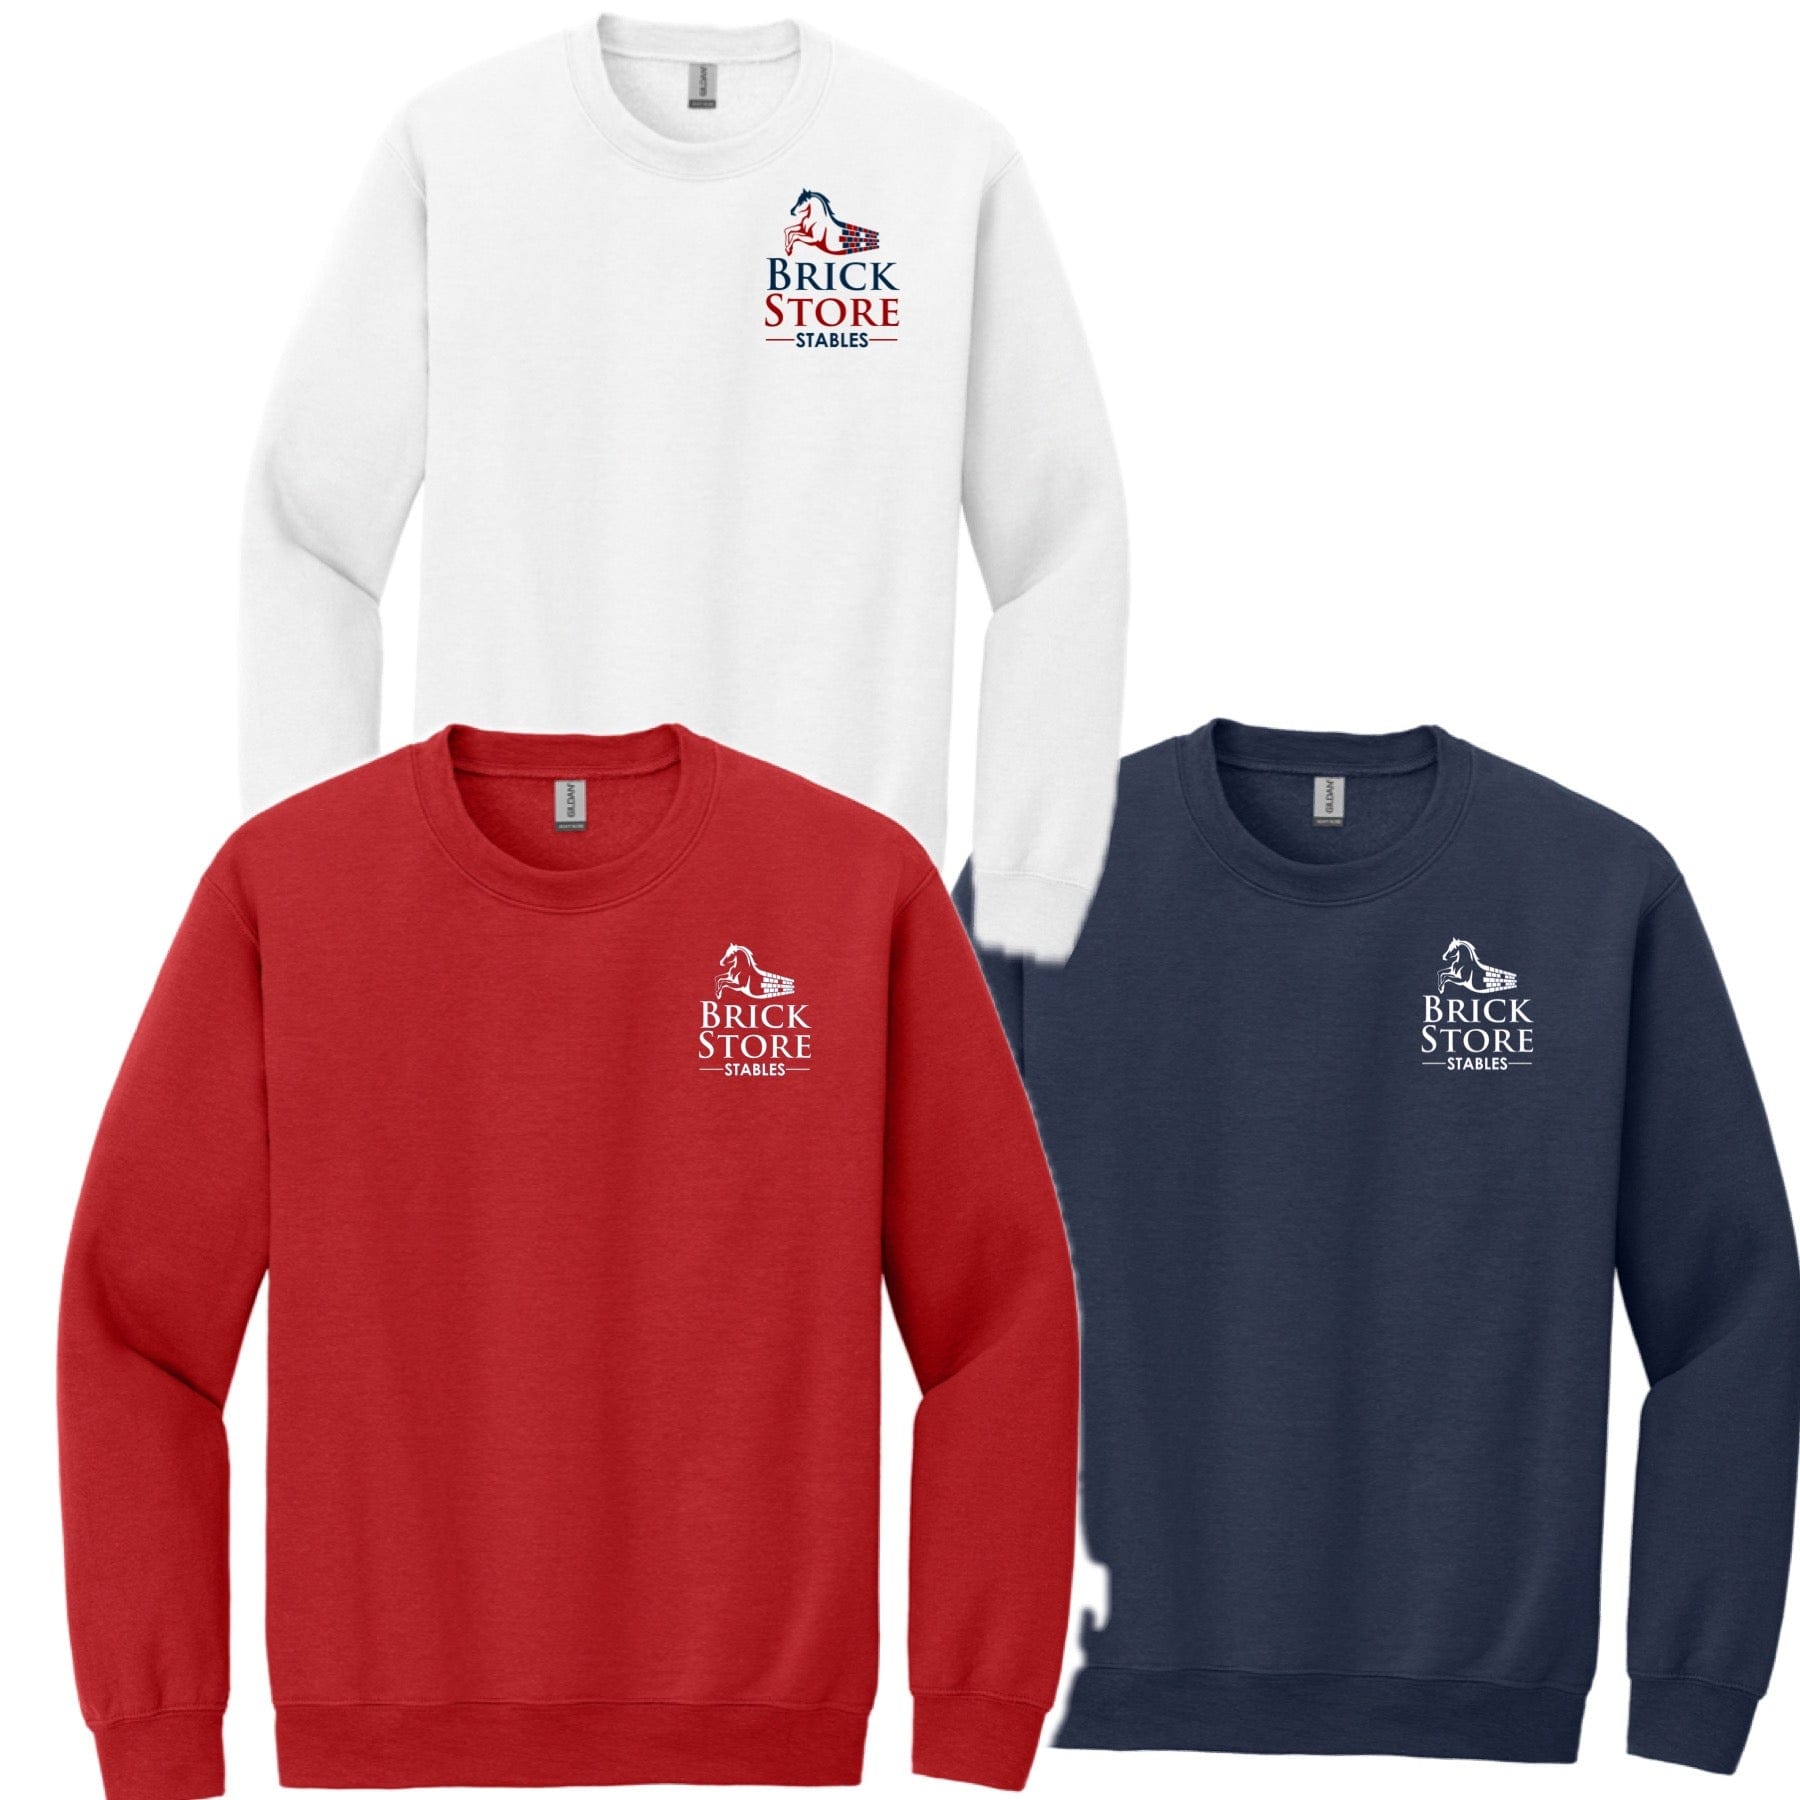 Equestrian Team Apparel Brick Store Stables Sweatshirt equestrian team apparel online tack store mobile tack store custom farm apparel custom show stable clothing equestrian lifestyle horse show clothing riding clothes horses equestrian tack store